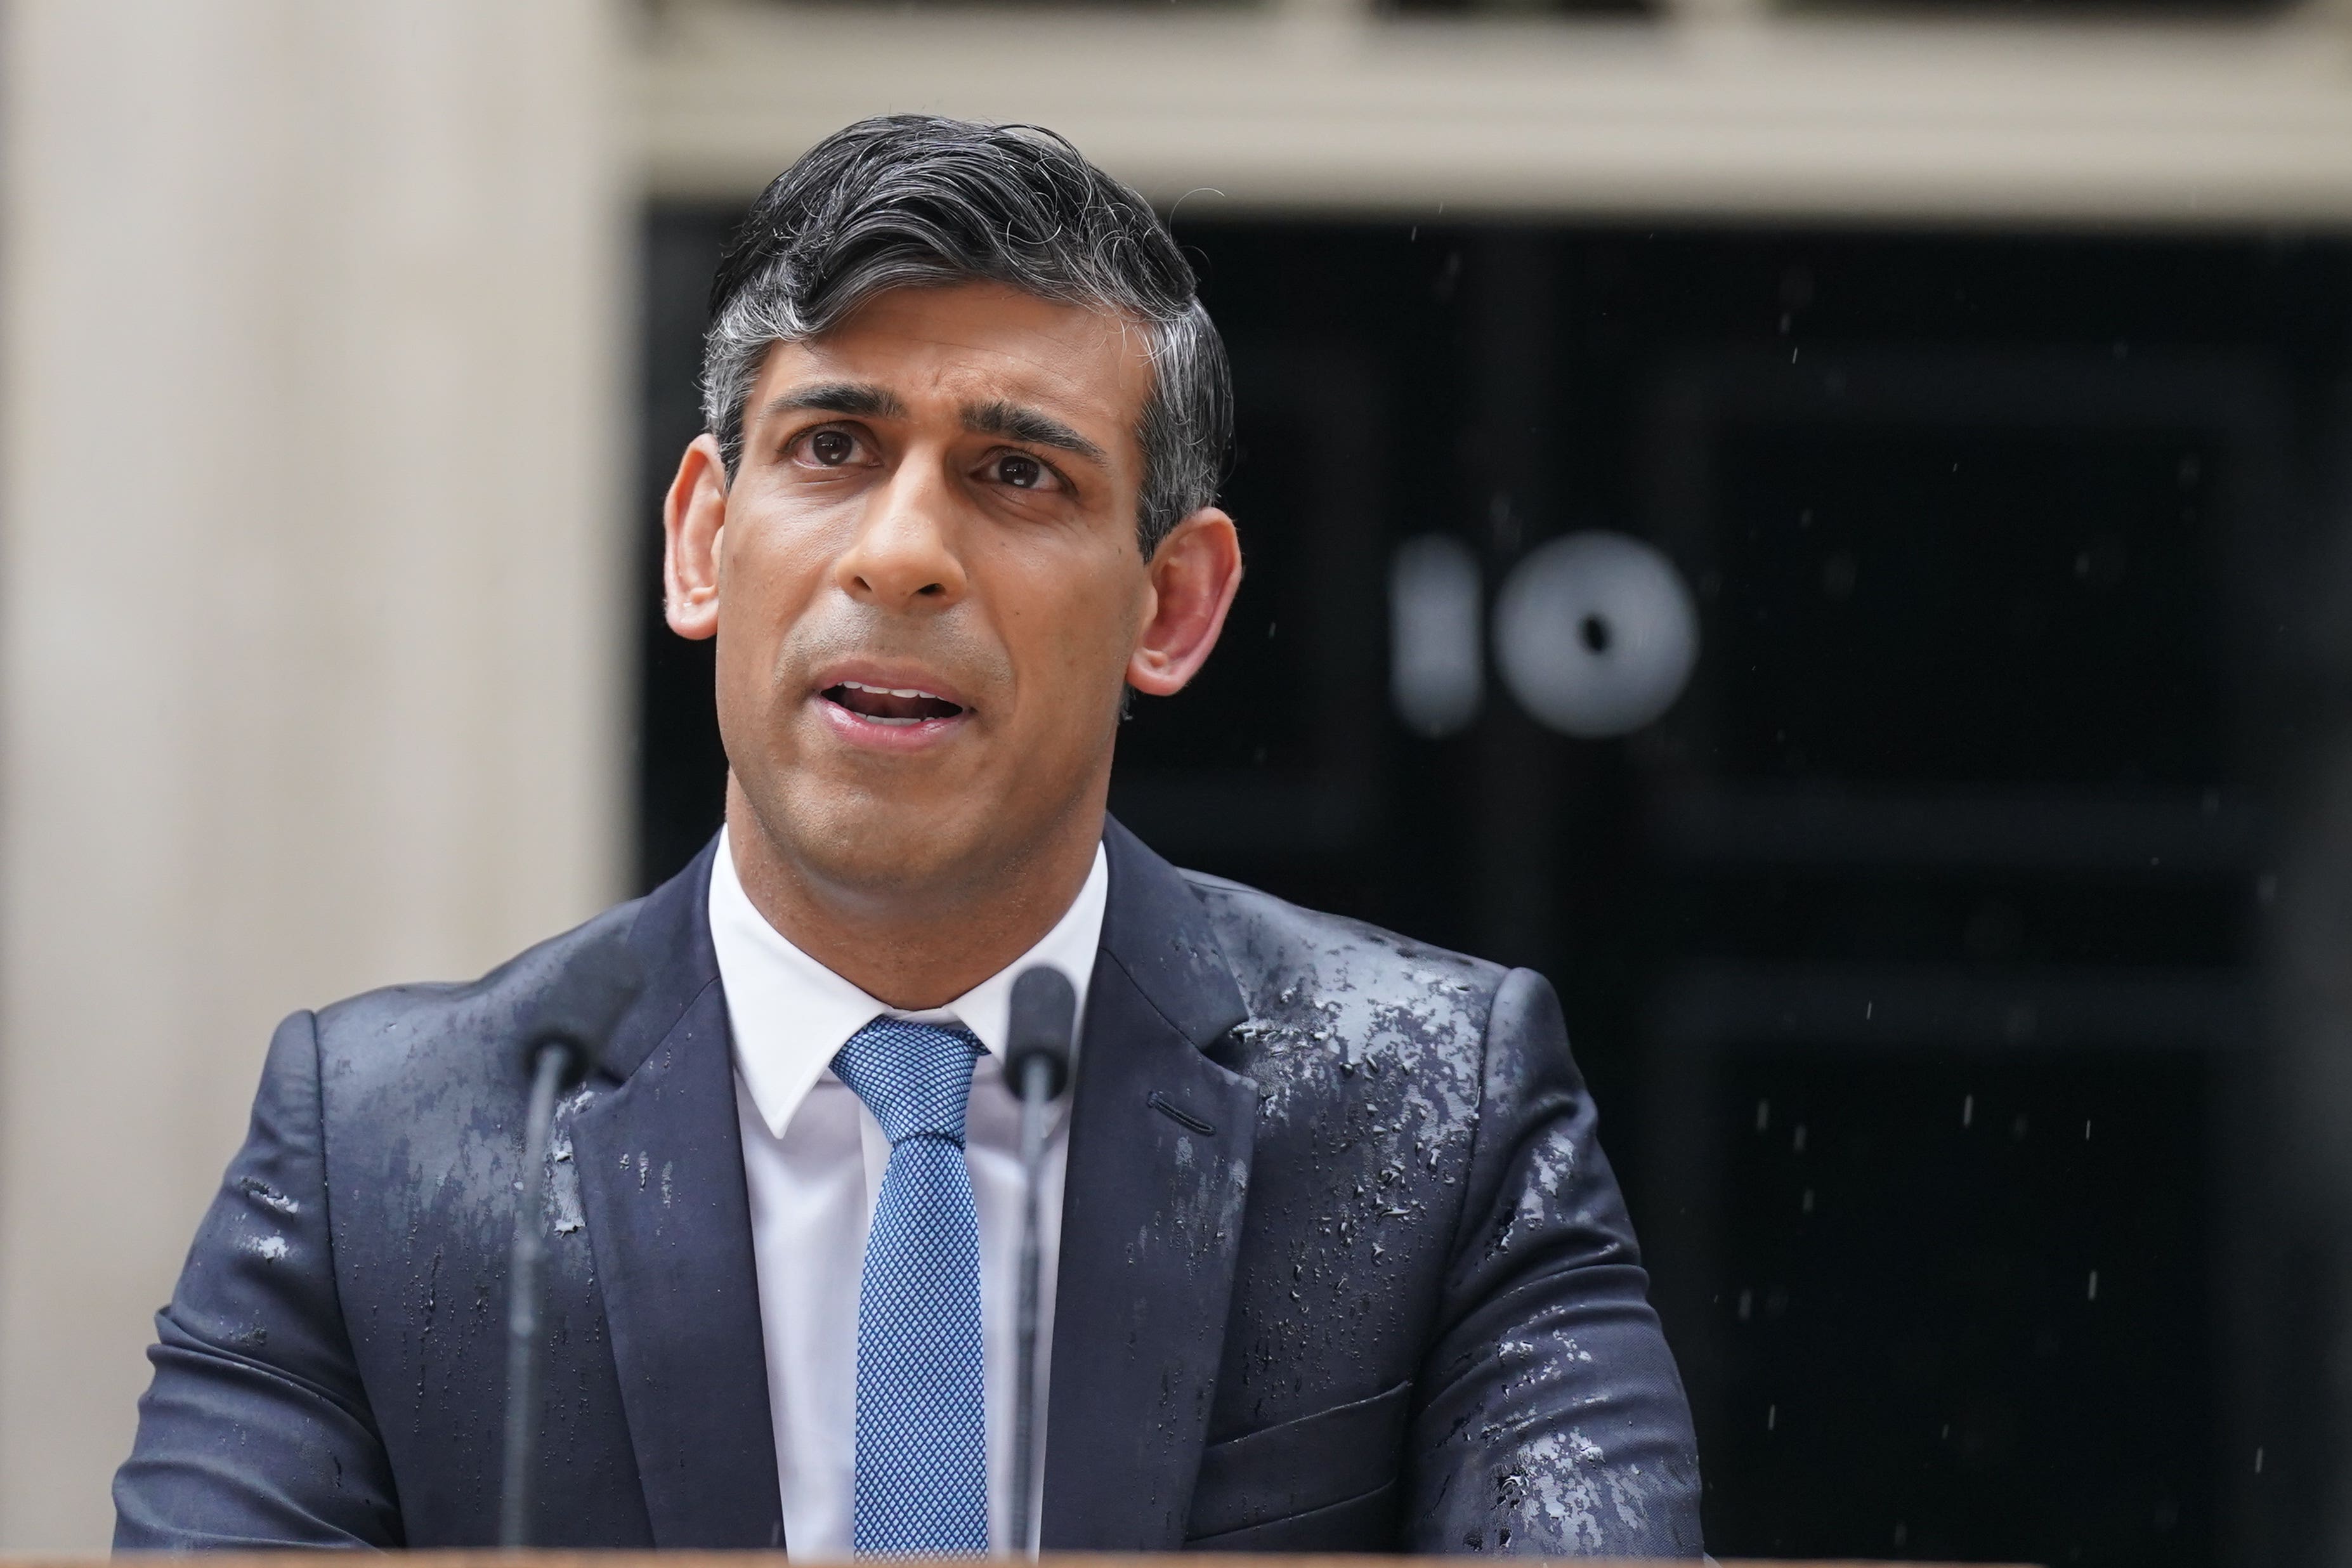 Rishi Sunak looked somewhat beleaguered and washed out in the rain at the Downing Street podium – an irresistible metaphor for the serial incompetence his administration has suffered